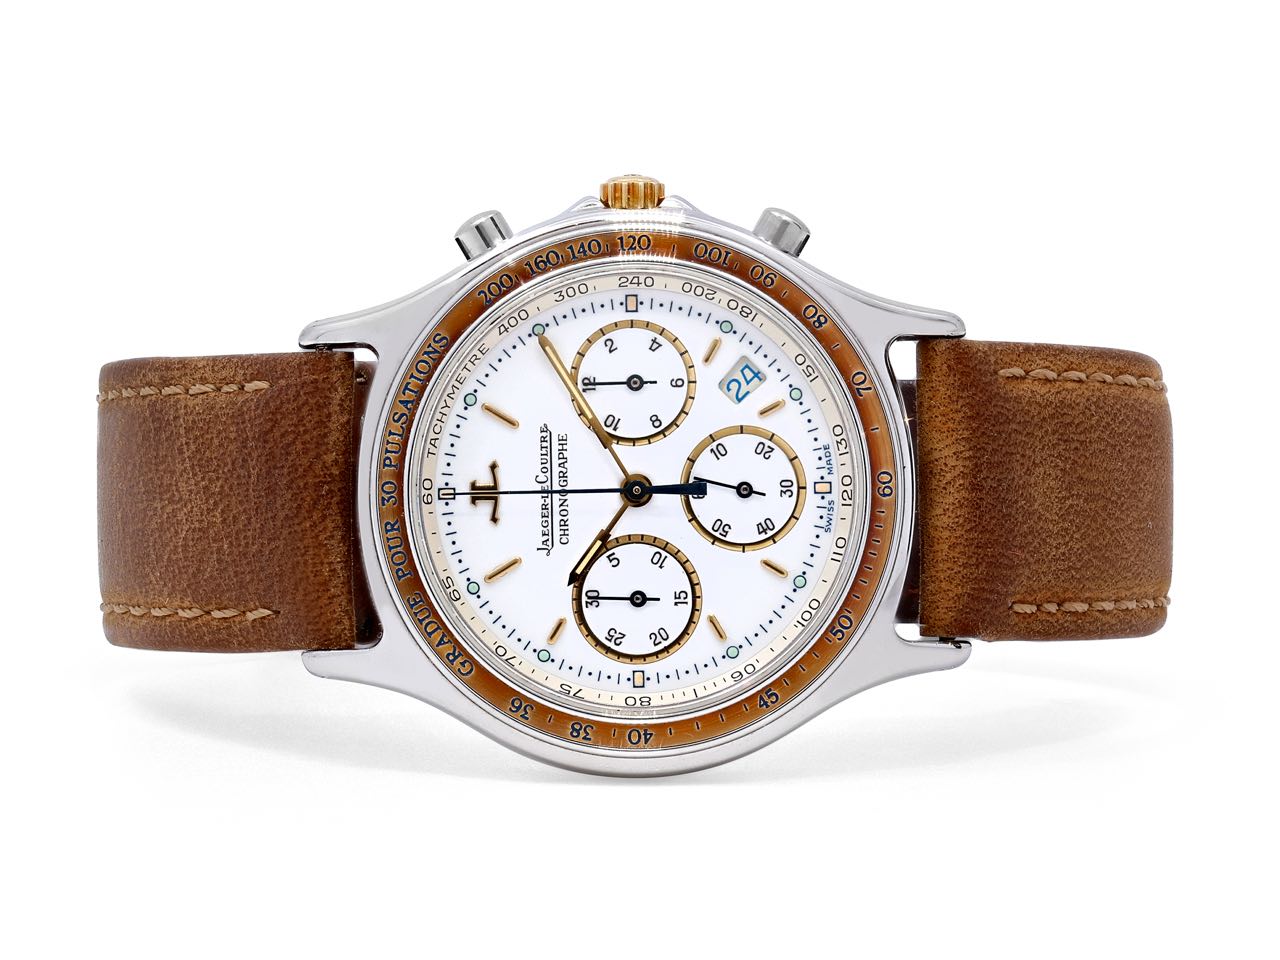 Jaeger-LeCoultre 'Heraion' Chronograph Steel Watch